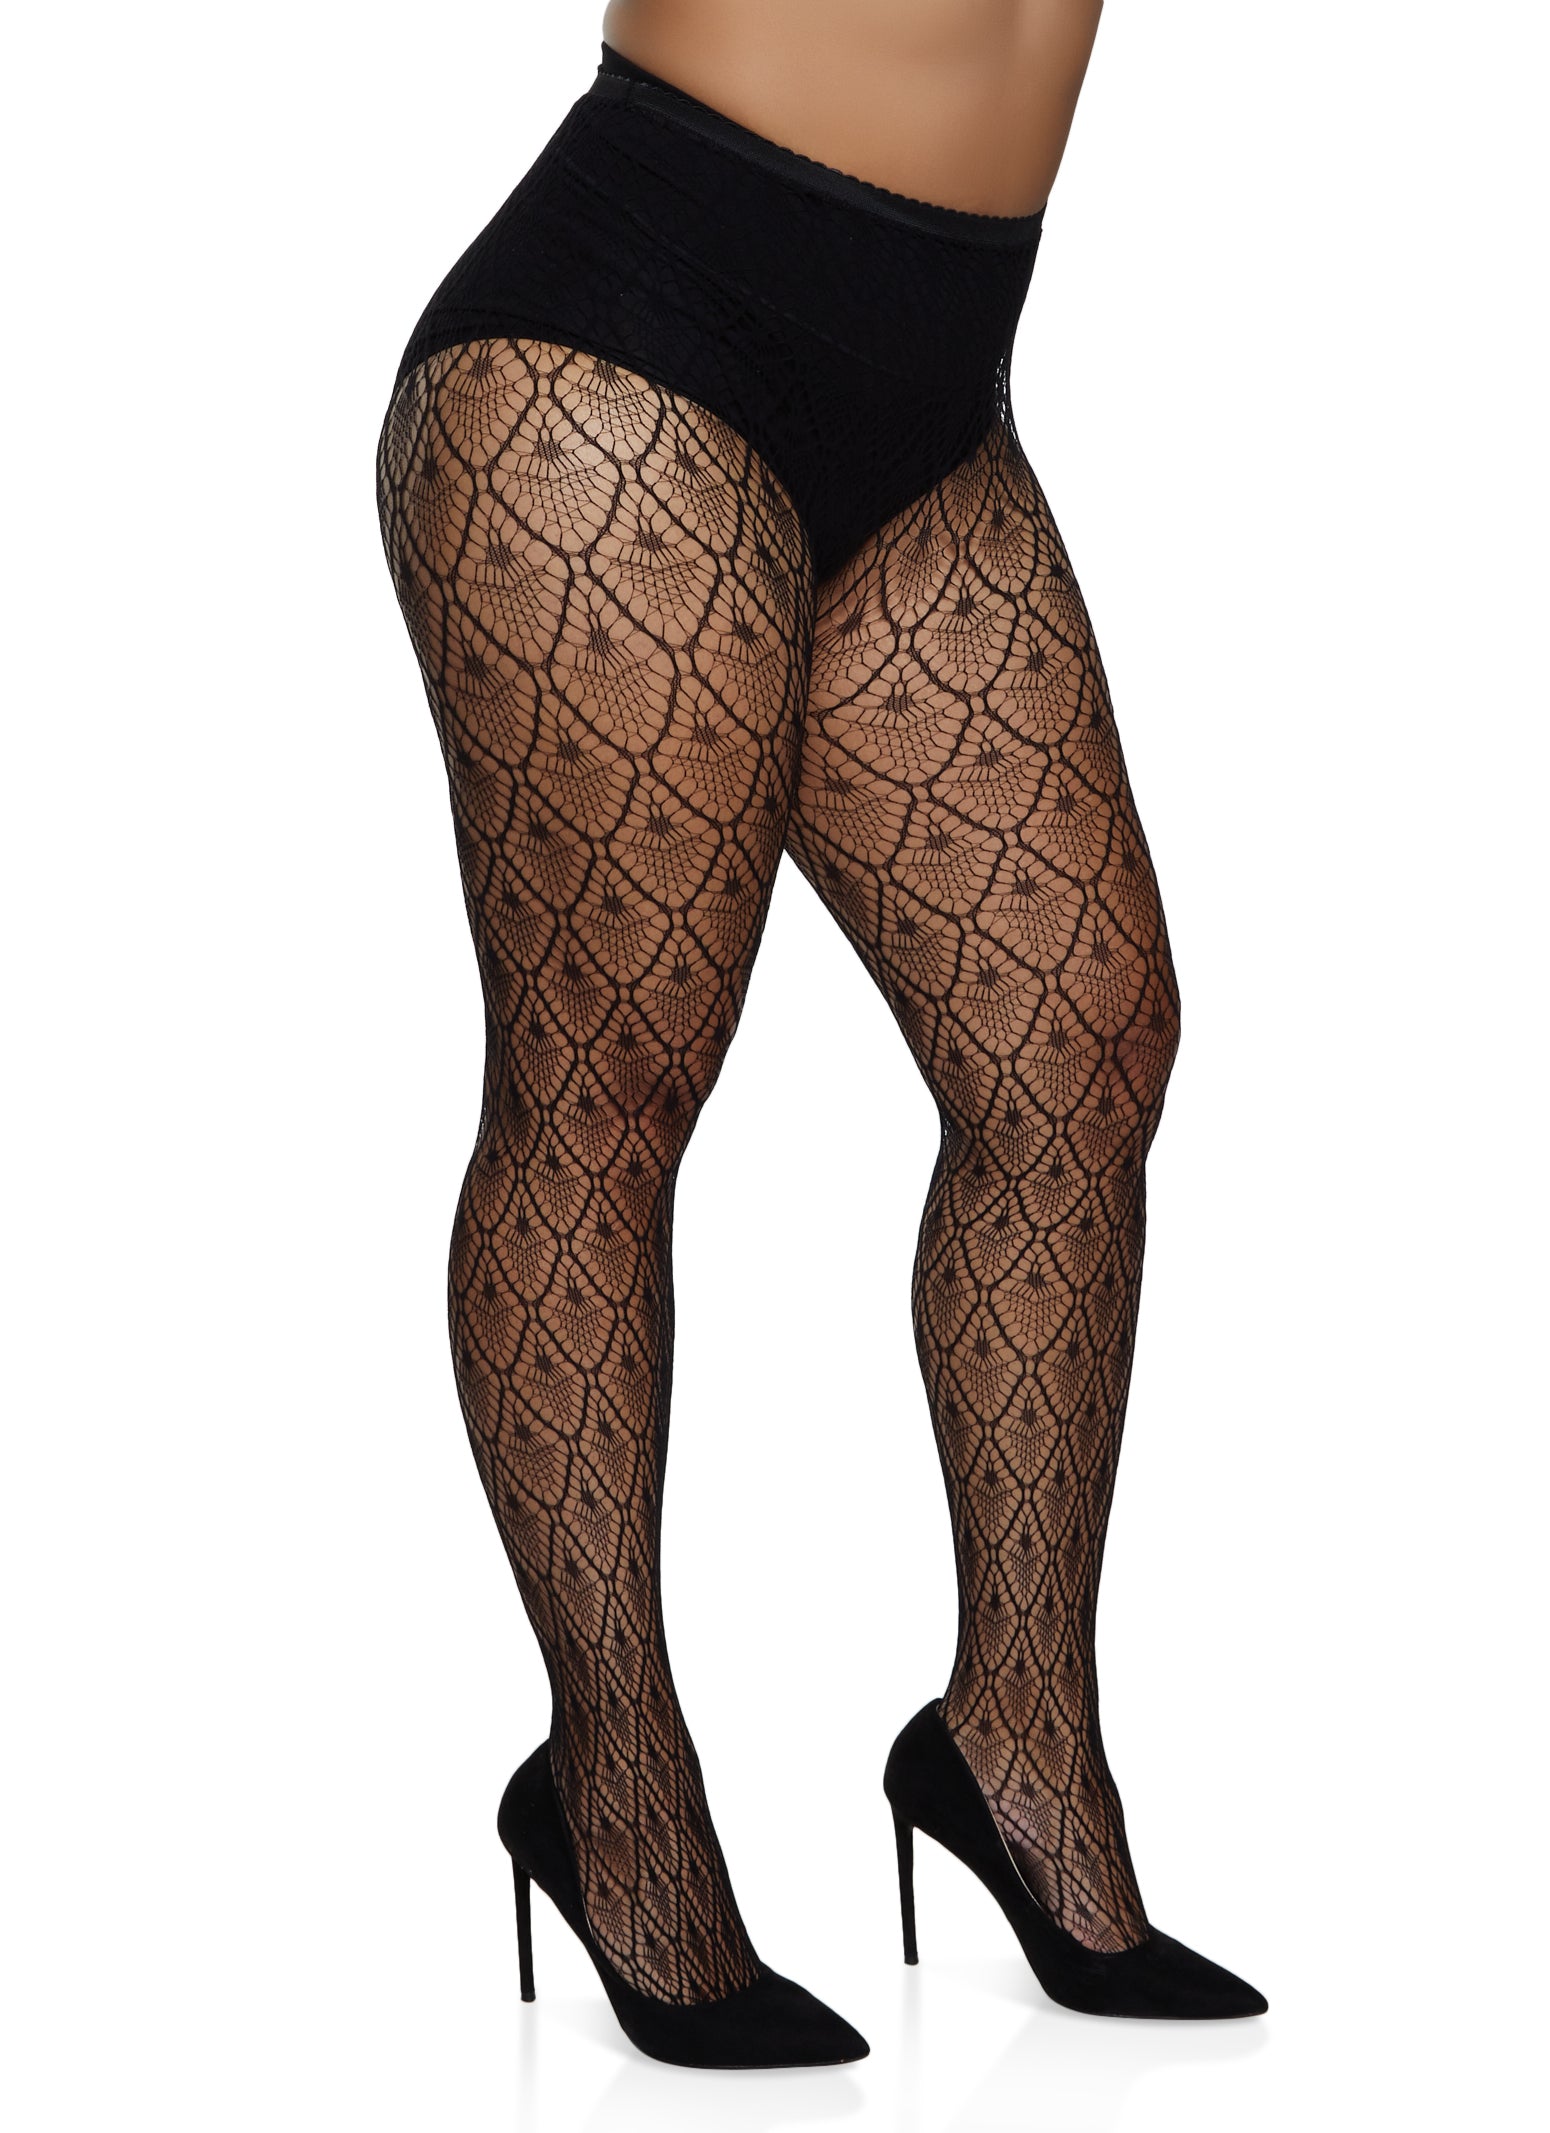 Plus Size Patterned Tights